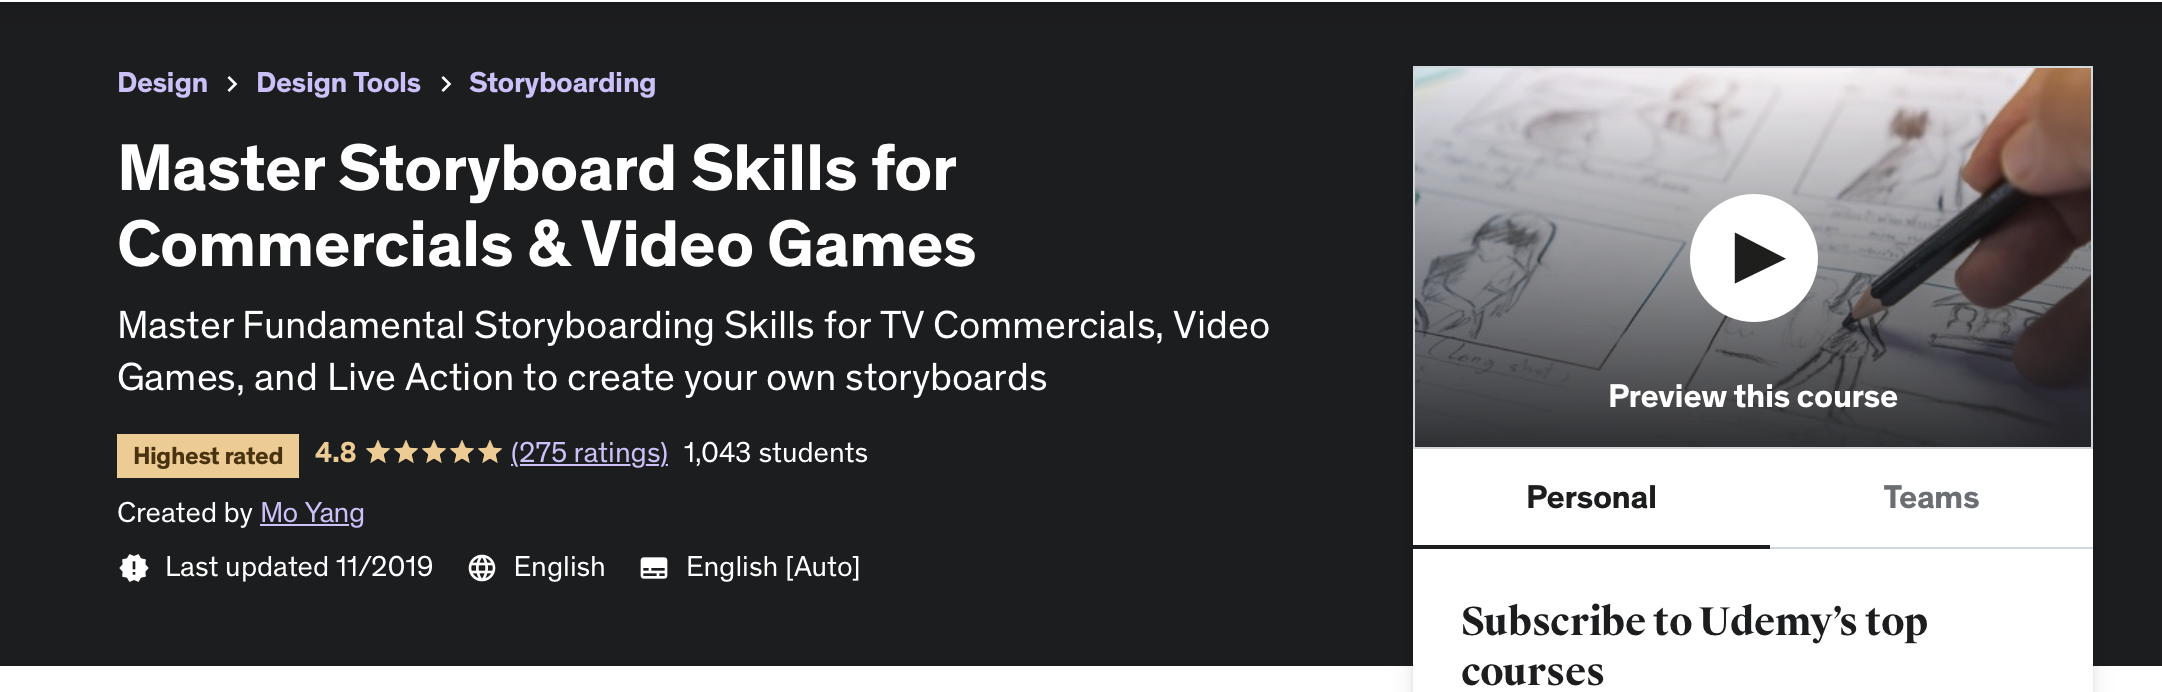 Master Storyboard Skills for Commercials and Video Games